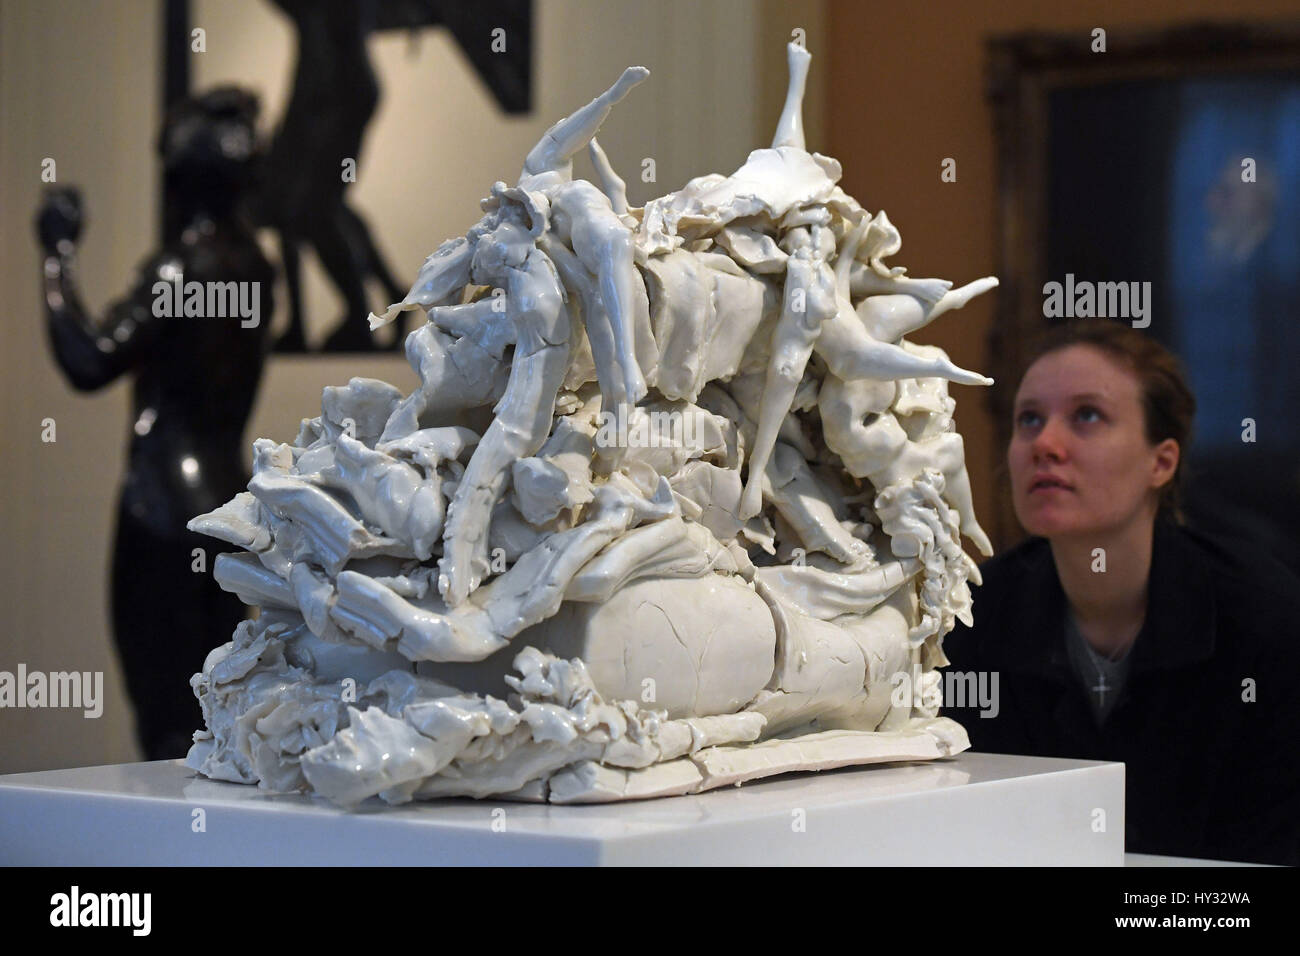 Monumental porcelain sculptures by contemporary British artist Rachel  Kneebone go on display as part of the sculpture collection at the Victoria  and Albert Museum in London Stock Photo - Alamy